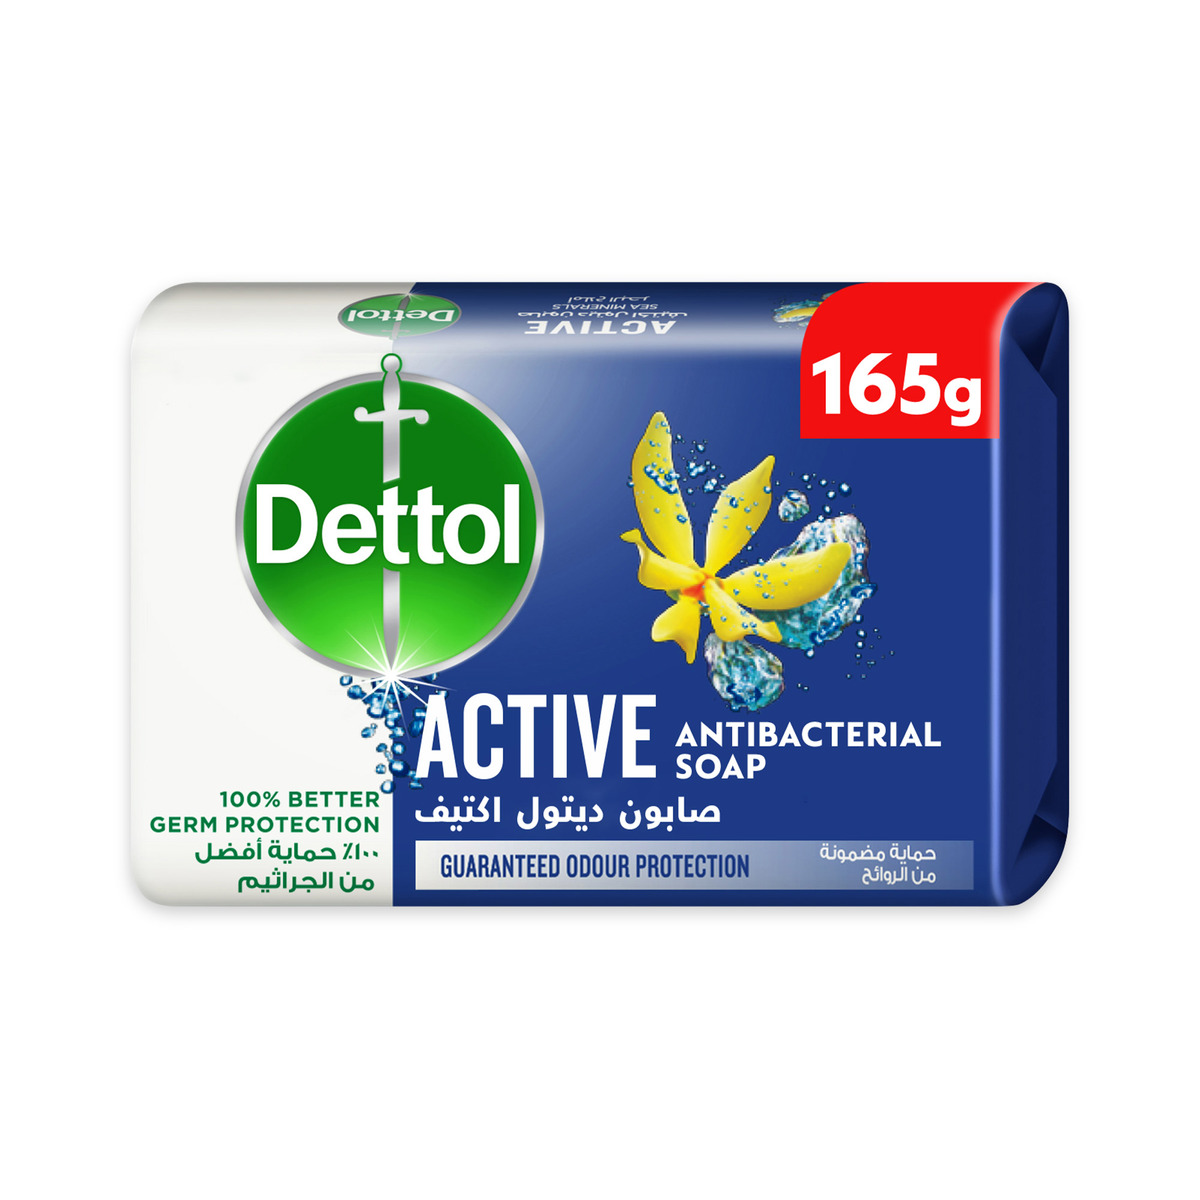 Dettol Active Anti-Bacterial Bathing Soap Bar Sea Minerals Fragrance 165 g